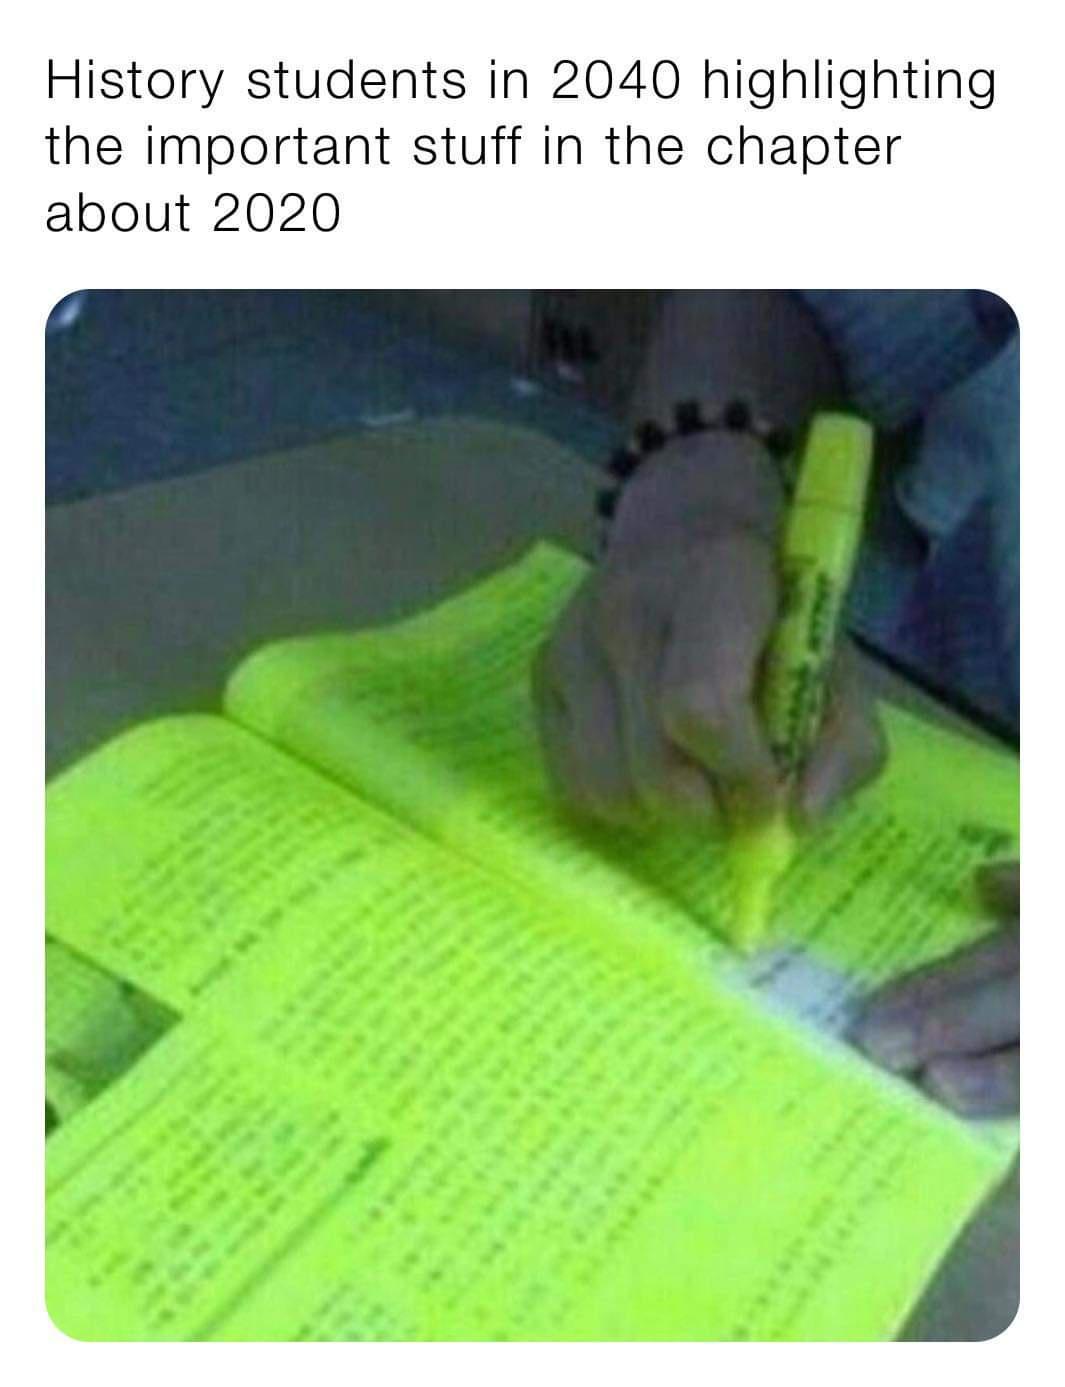 highlighting 2020 meme - History students in 2040 highlighting the important stuff in the chapter about 2020